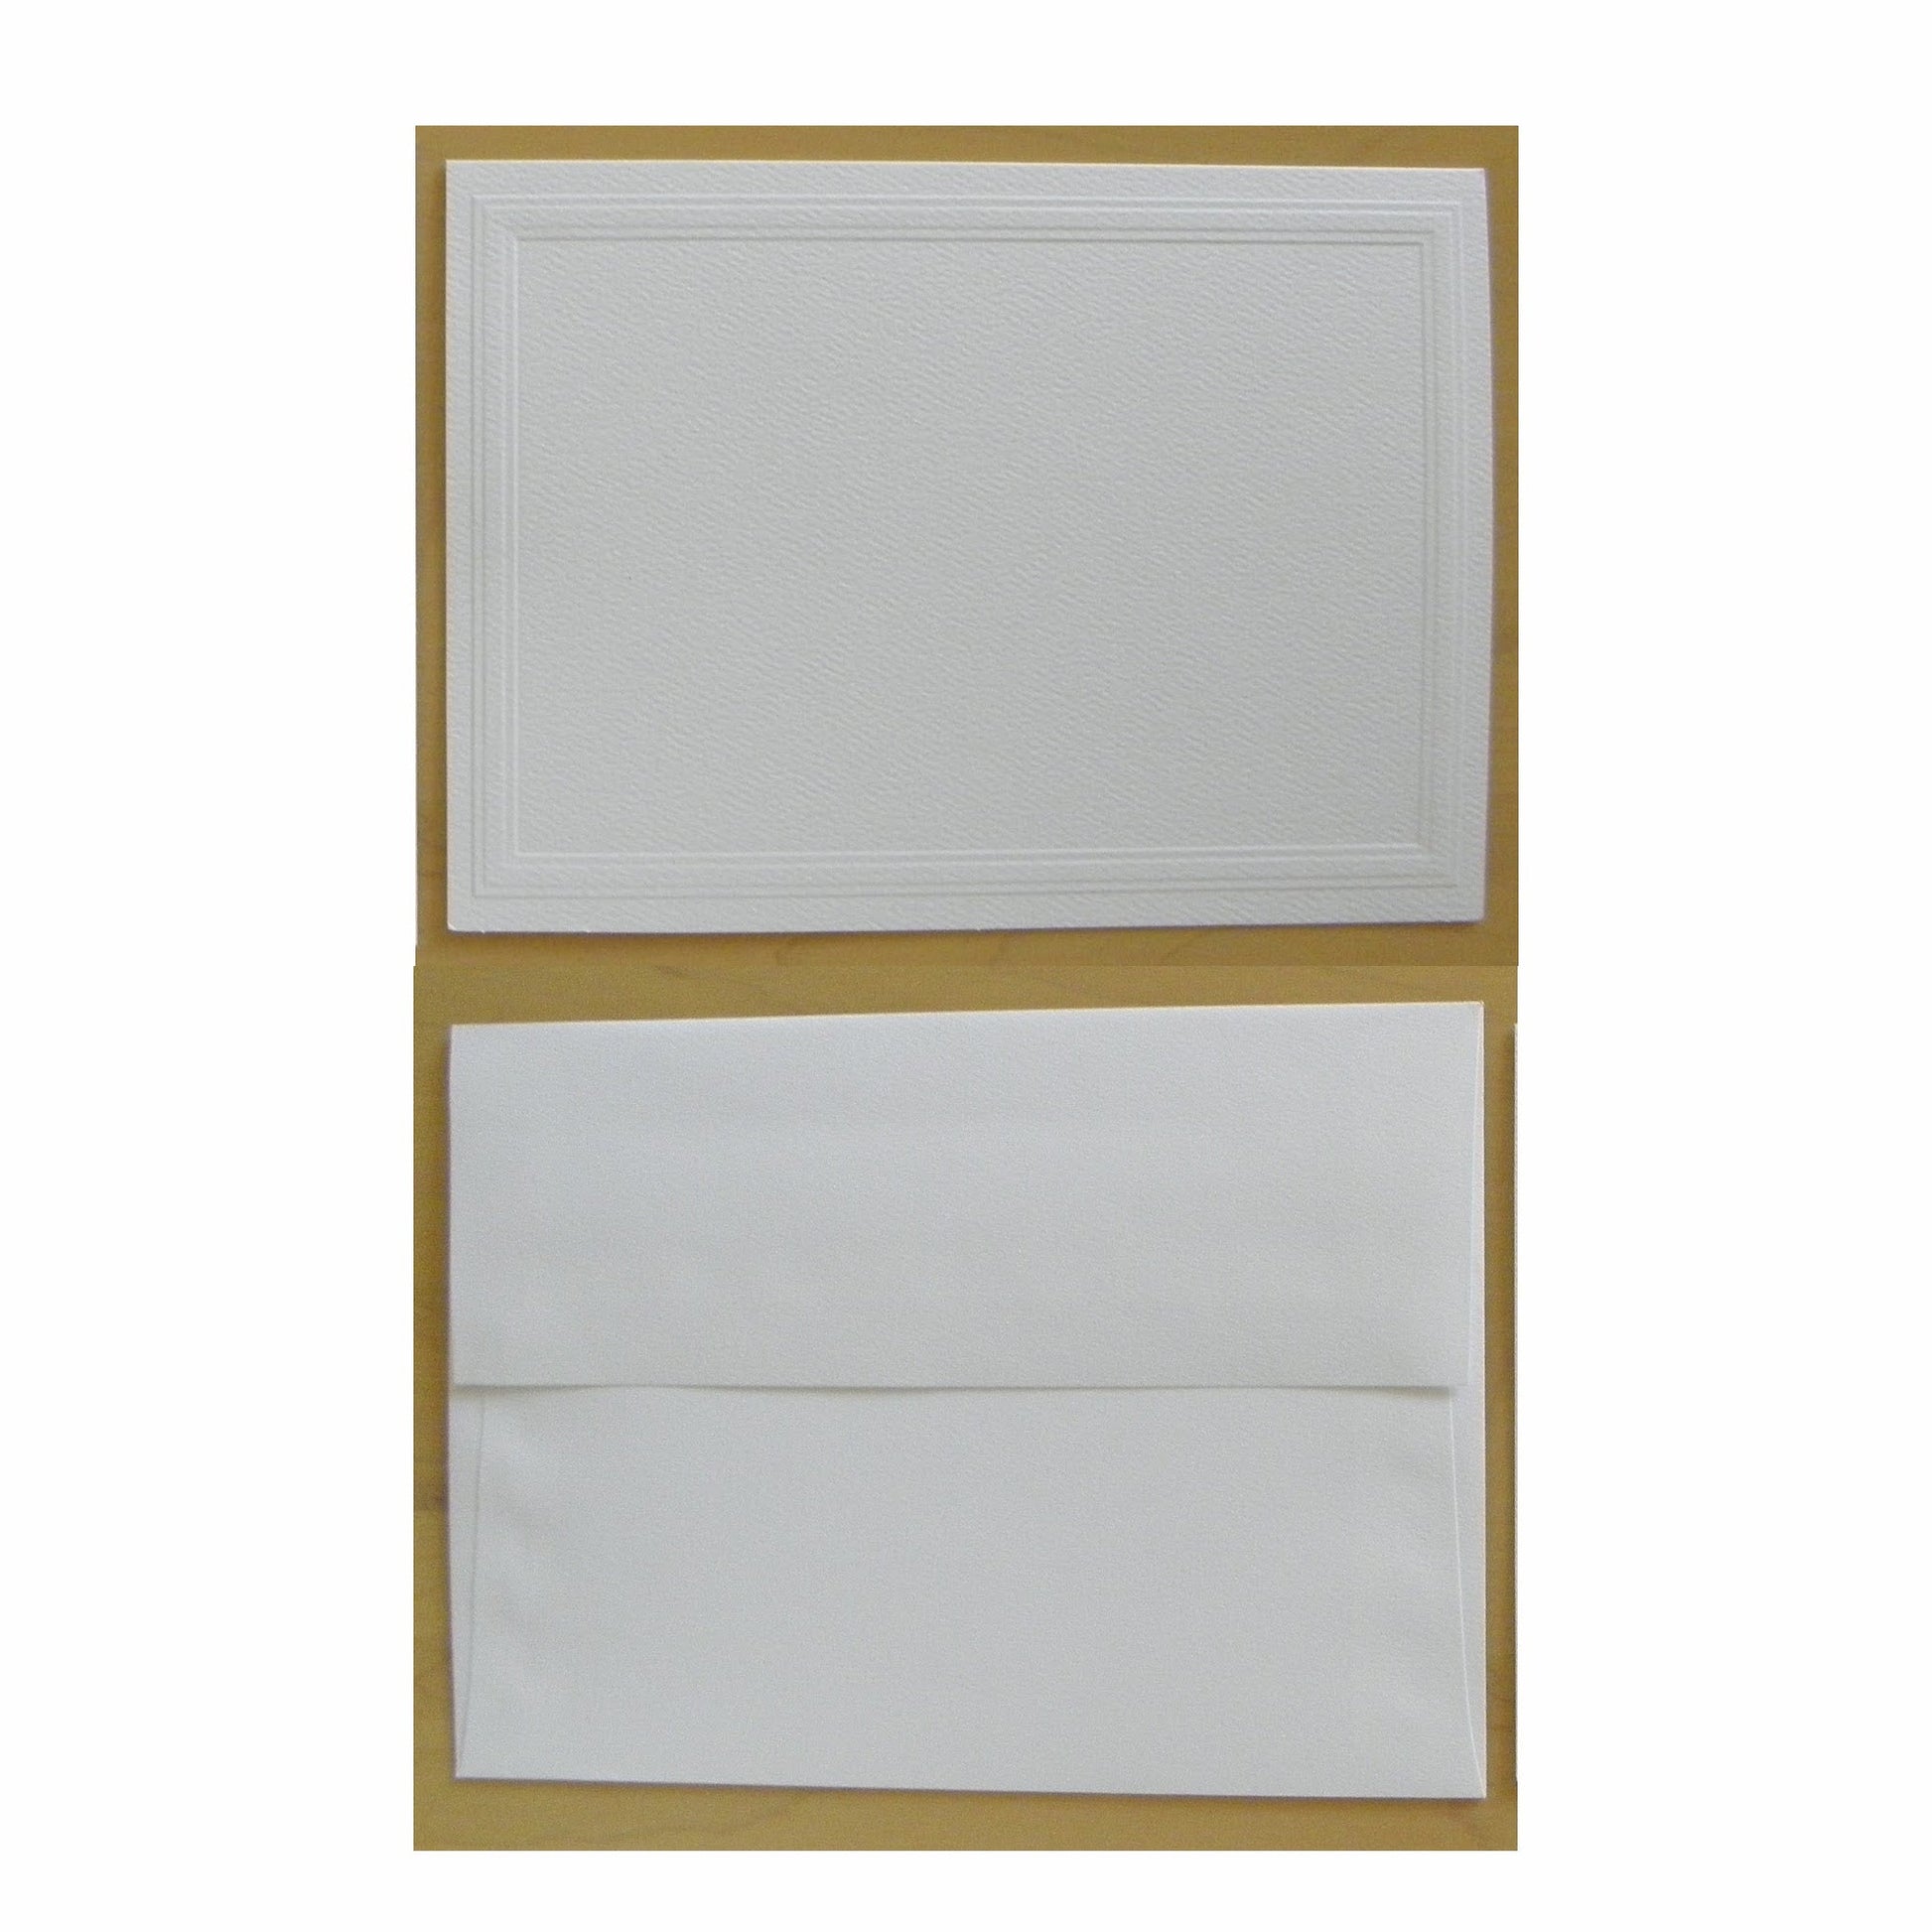 Photo of the Classic card stock and envelope